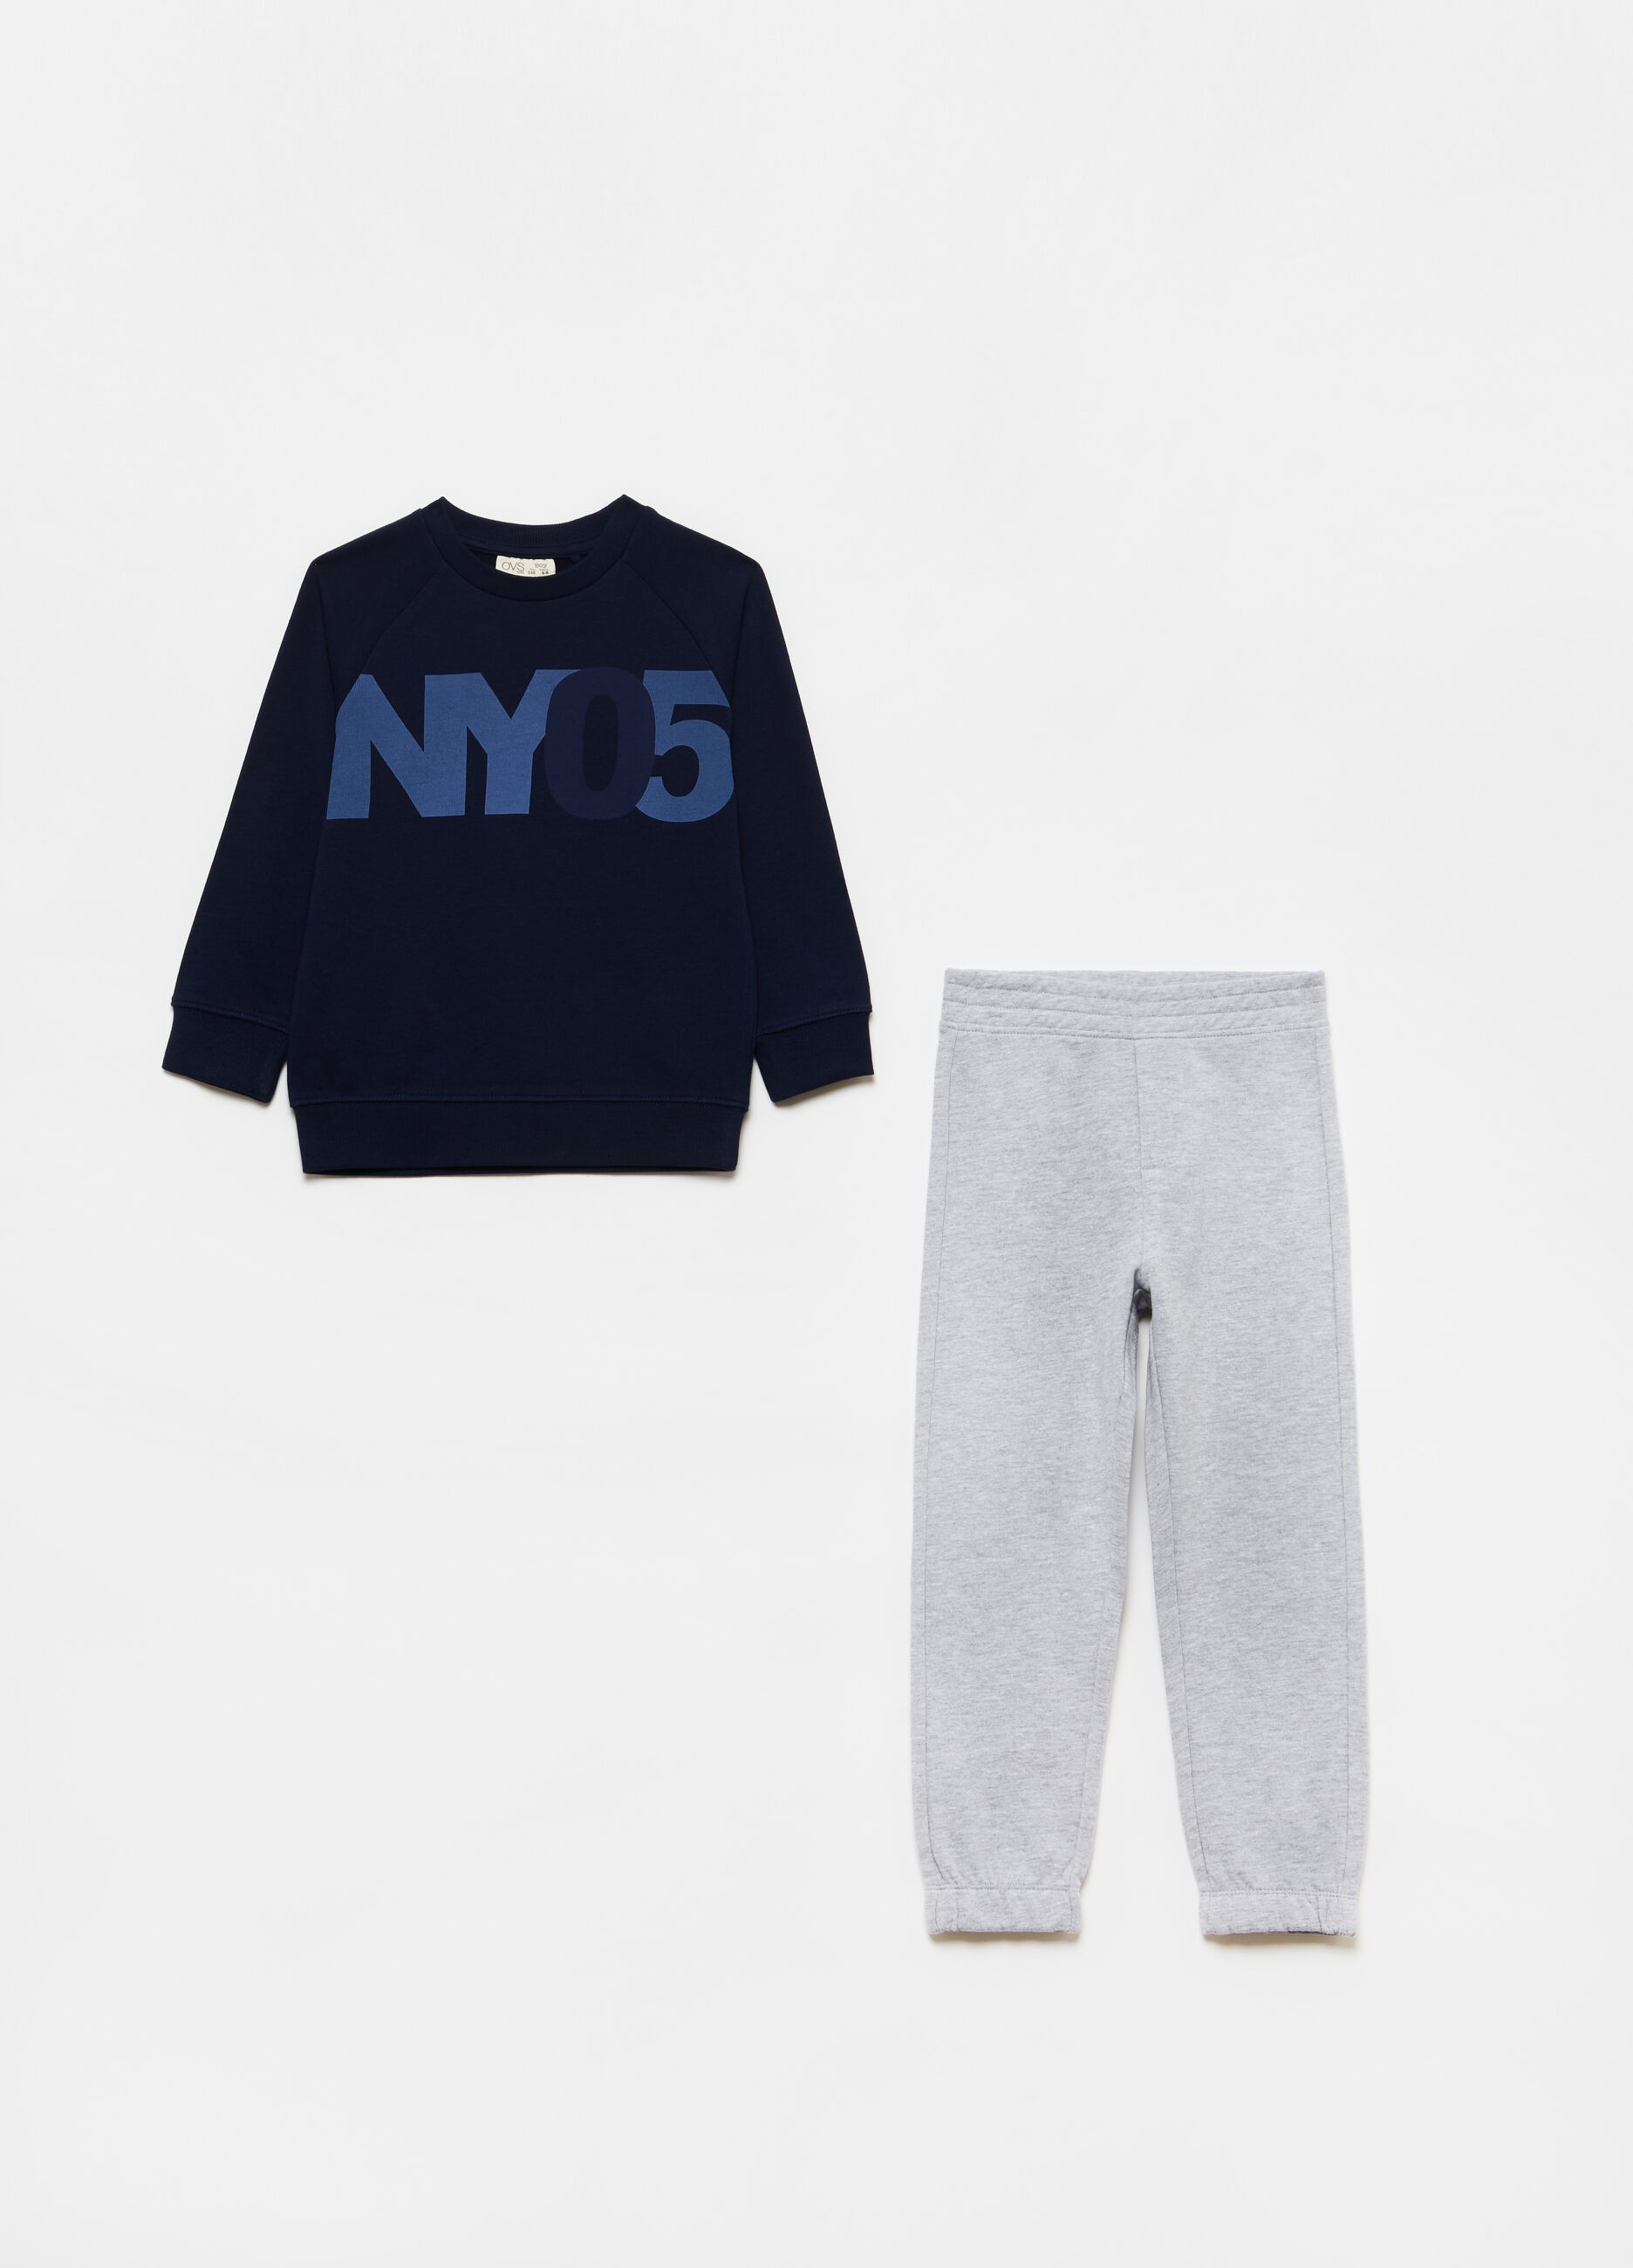 Jogging set with trousers and sweatshirt with round neck